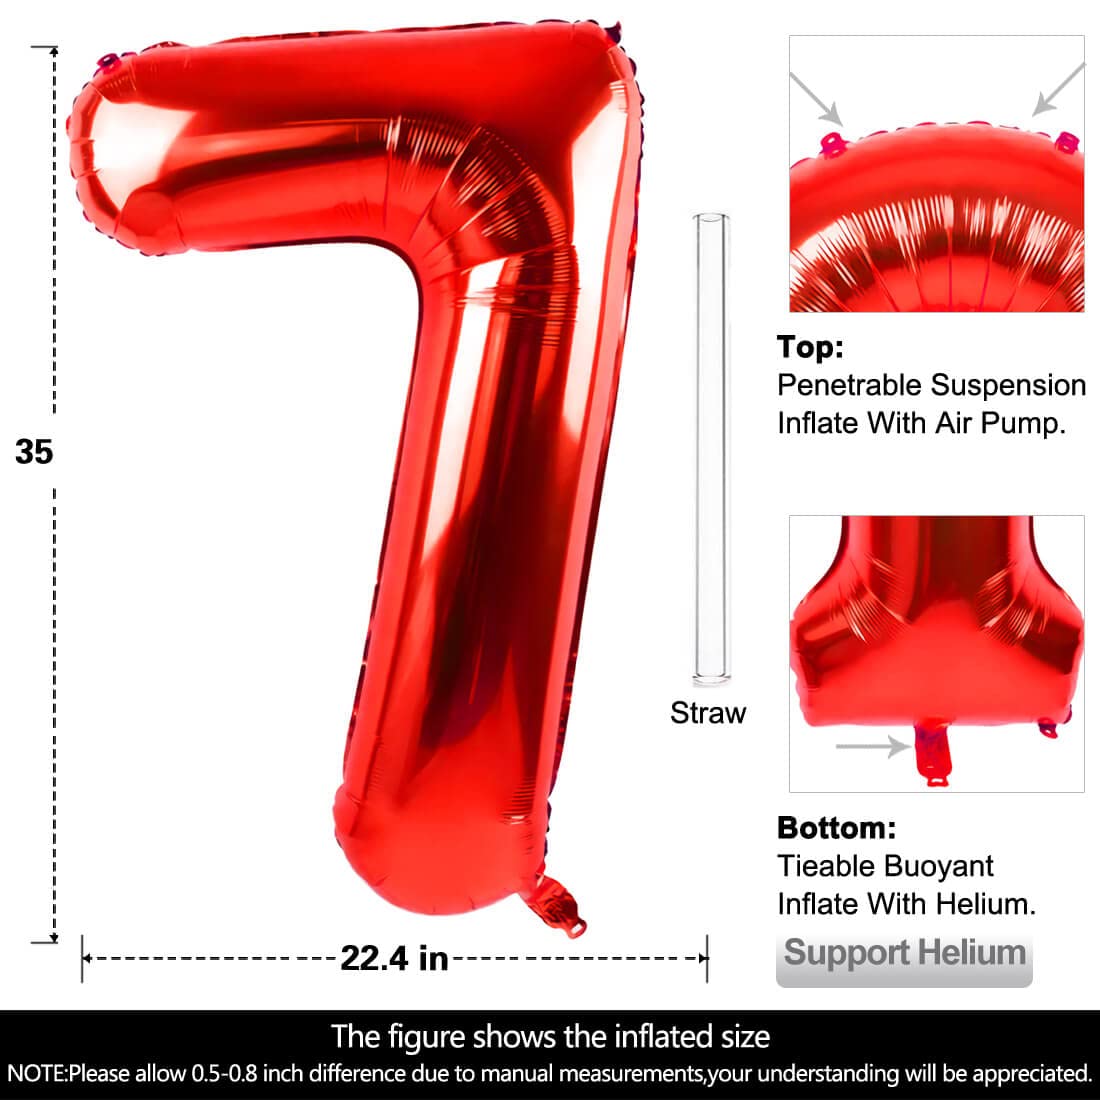 40 Inch Large Red Number 7 Balloon Extra Big Size Jumbo Digit Mylar Foil Helium Balloons for Birthday Party Celebration Decorations Graduations Wedding Anniversary Baby Shower Supplies Photo Shoot